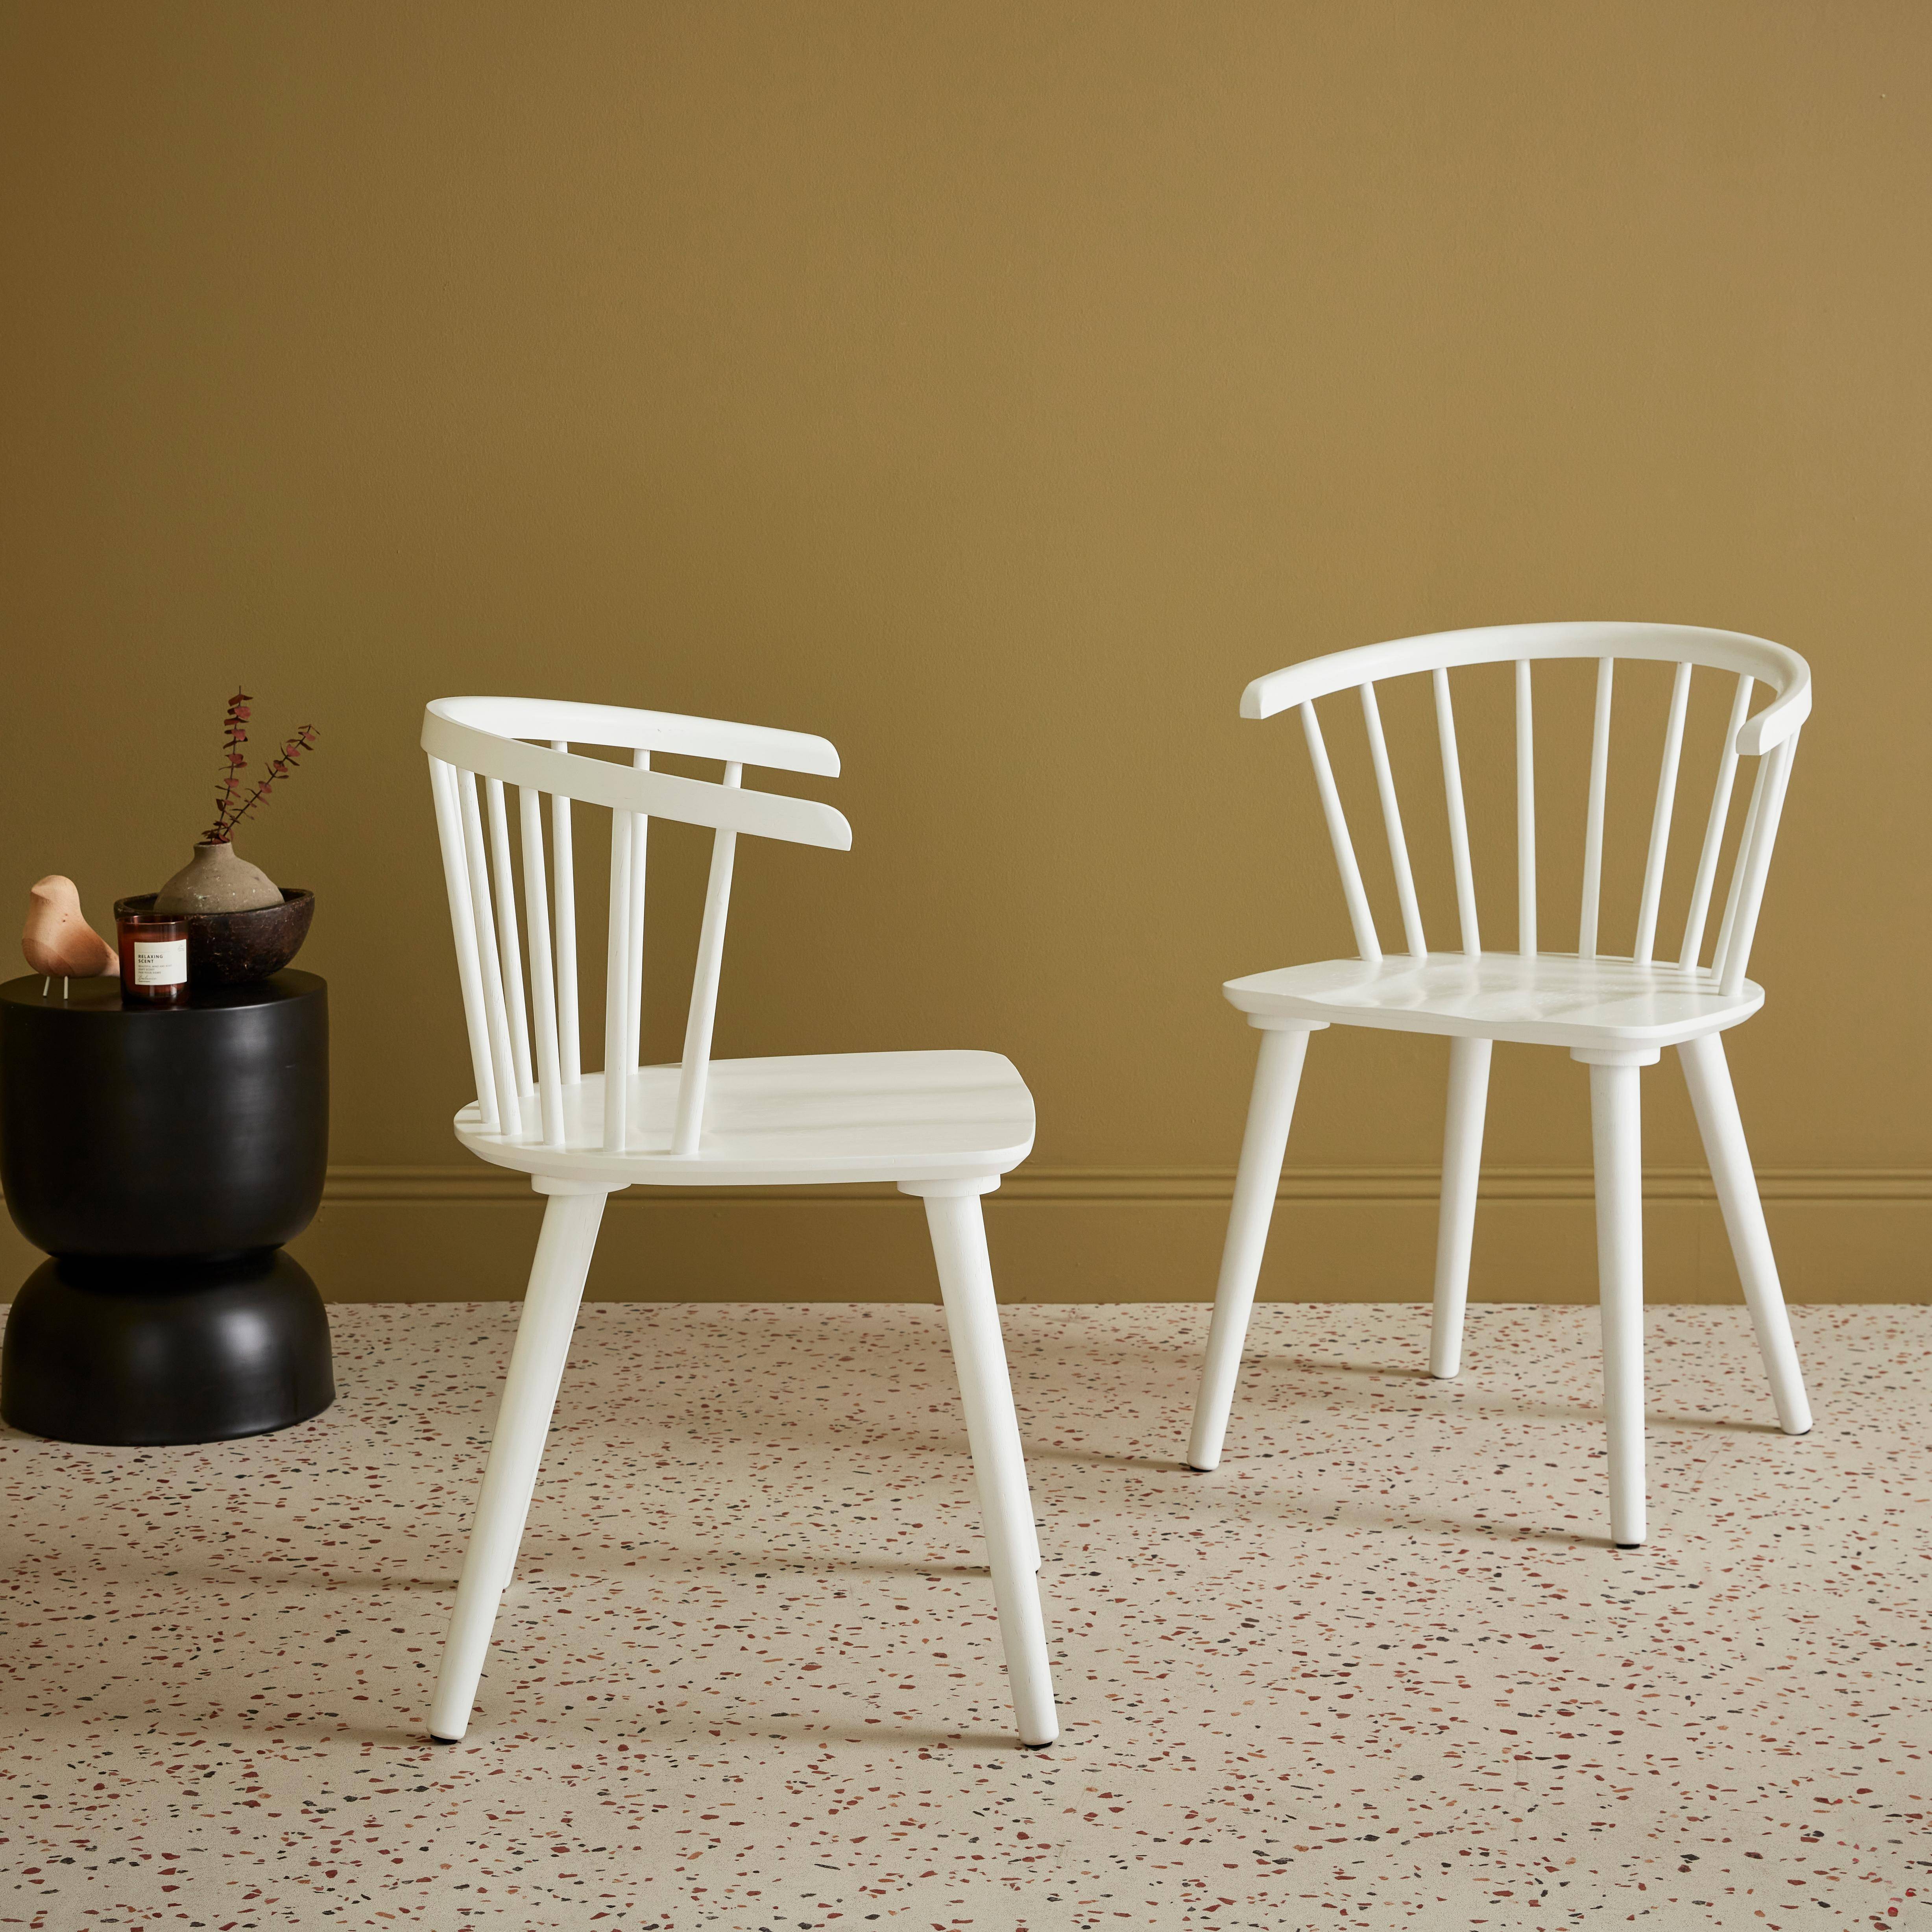 Pair of Wood and Plywood Spindle Chairs, white, L53 x W47.5 x H76cm,sweeek,Photo2